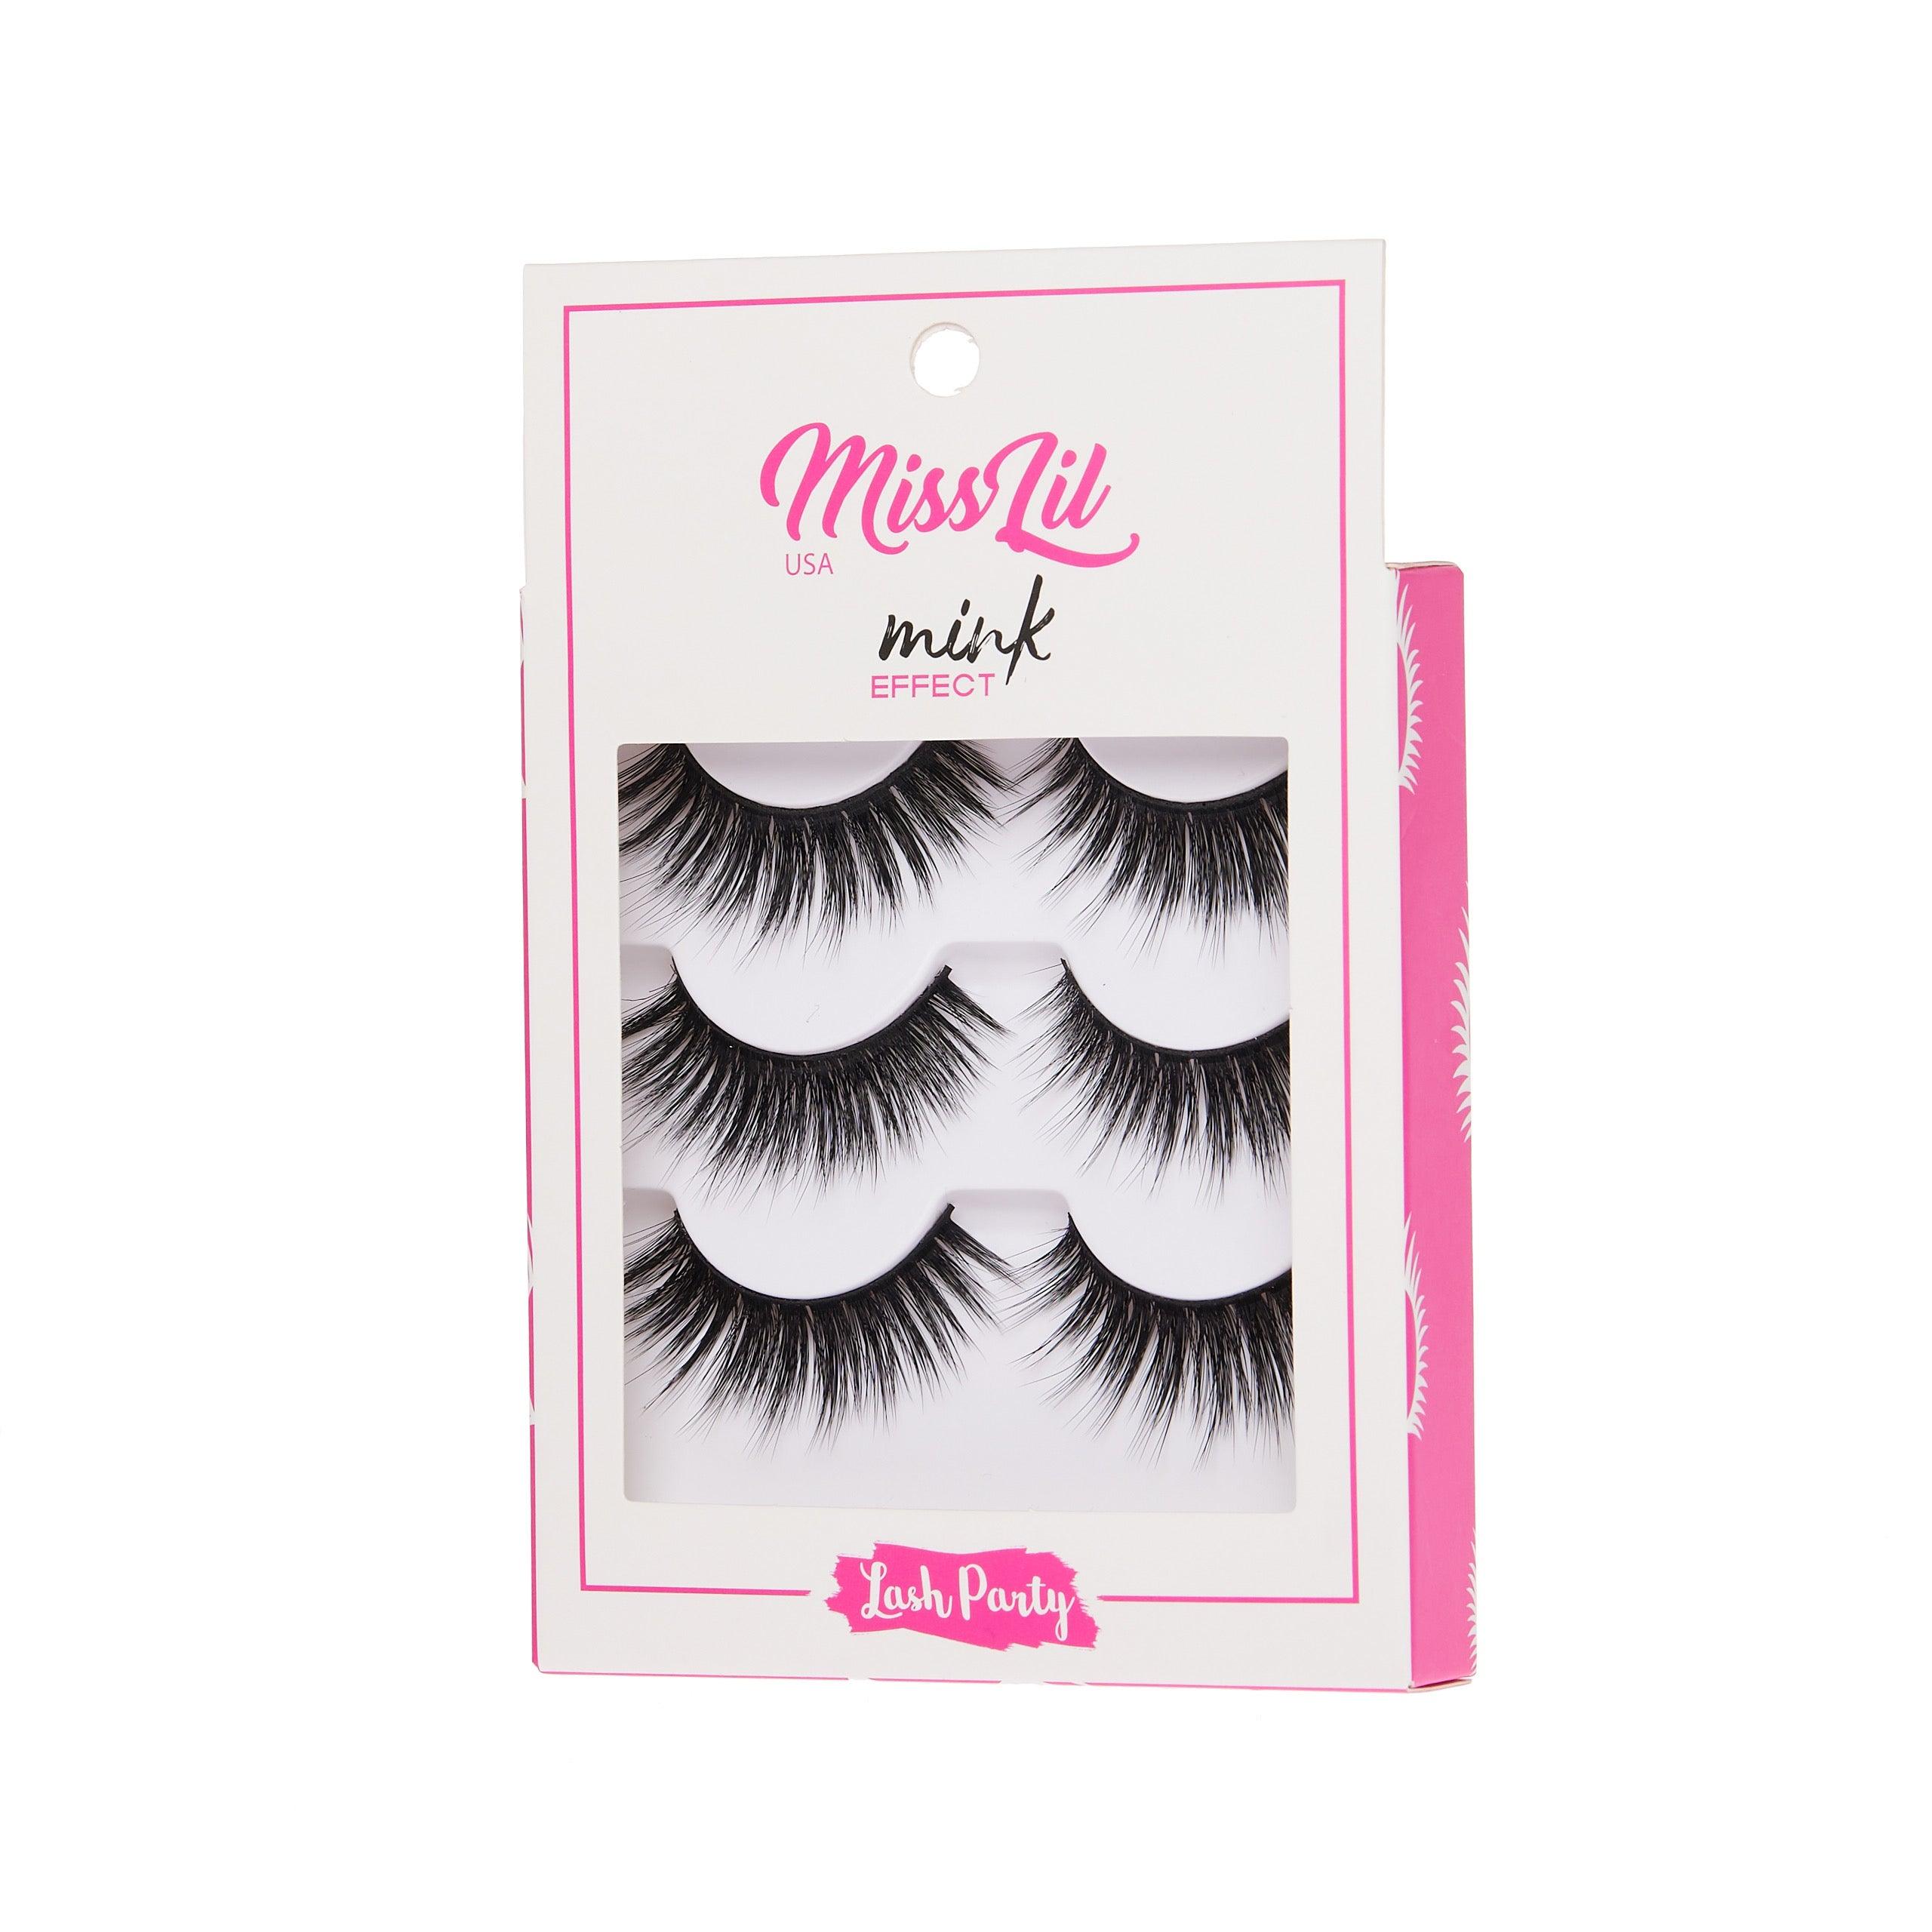 3-Pair Faux Mink Effect Eyelashes - Lash Party Collection #23 - Pack of 3 - Miss Lil USA